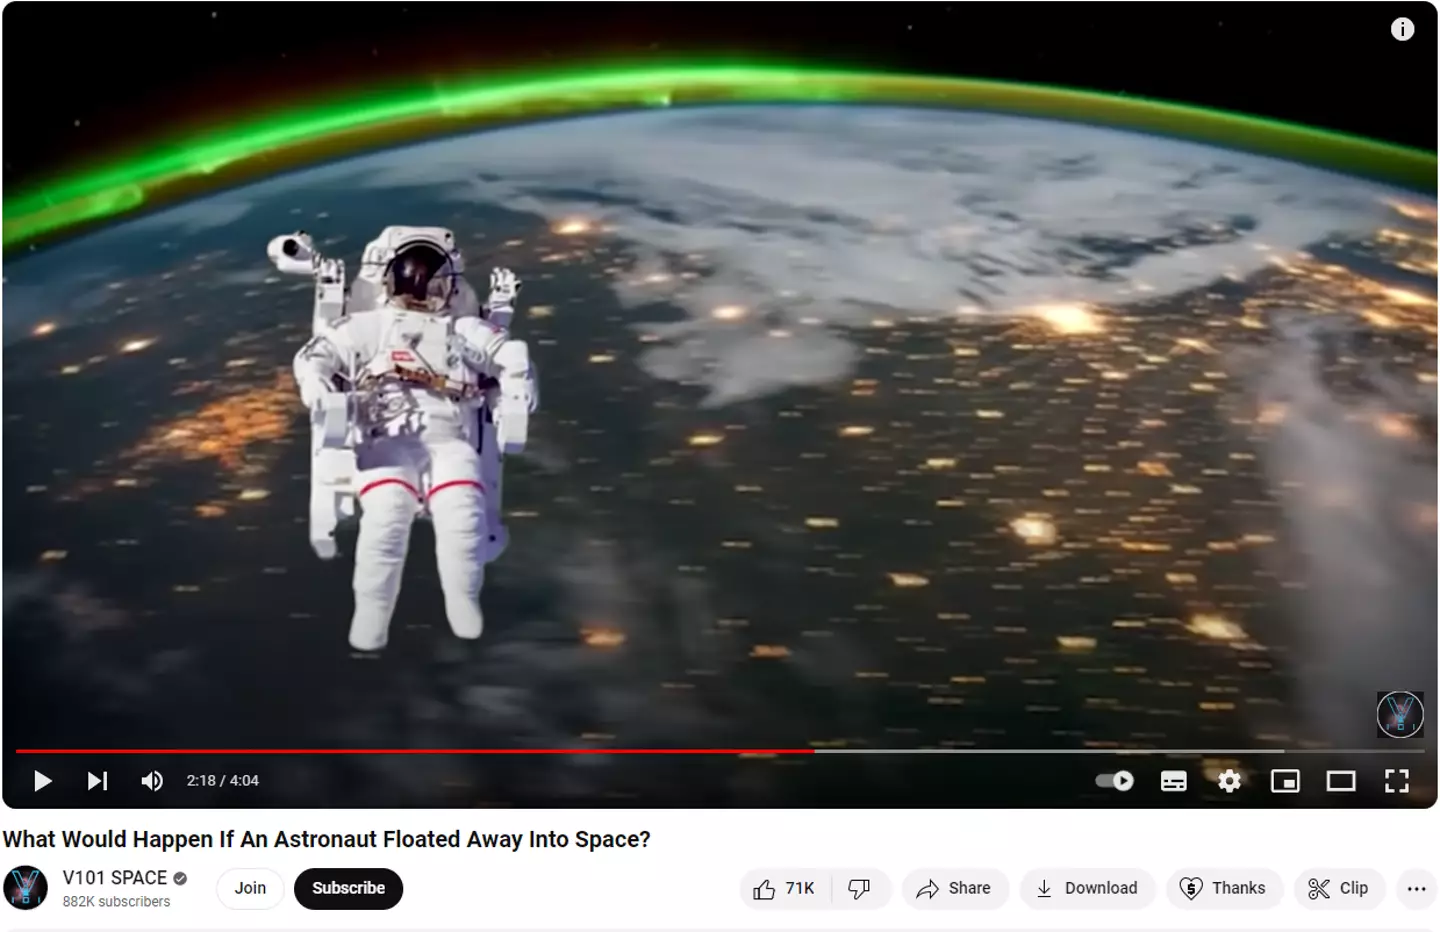 @V101SPACE looks at what would happen if an astronaut floated away into space.